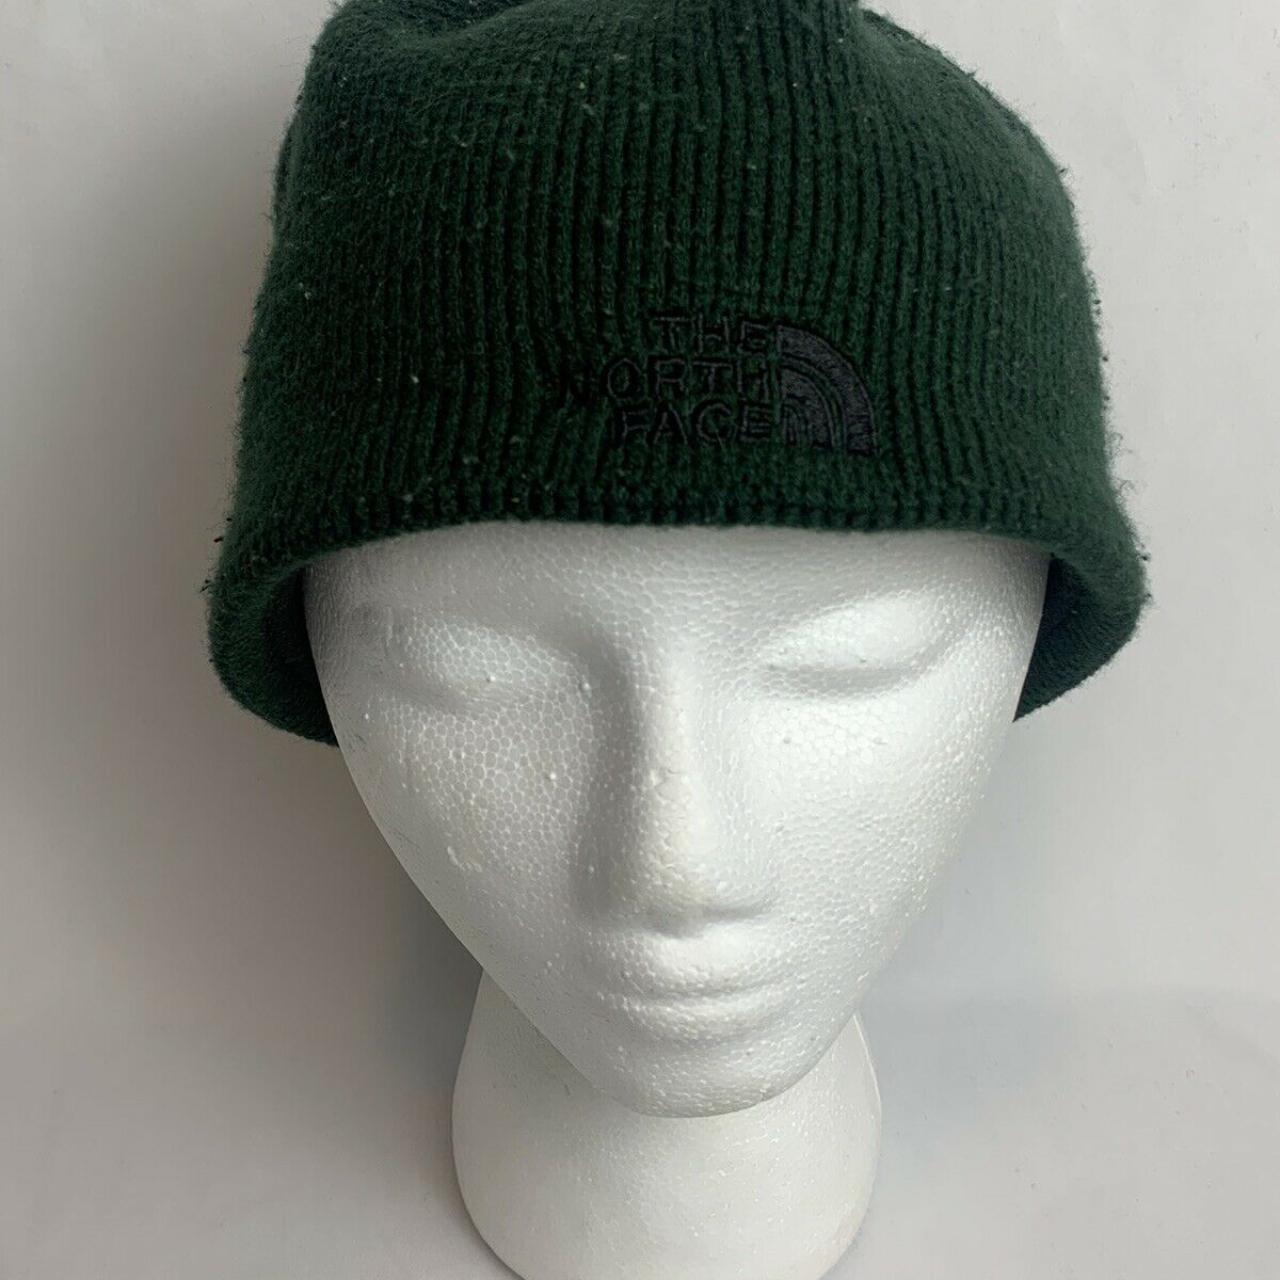 The North Face Knit Beanie Green OS Unisex... - Depop